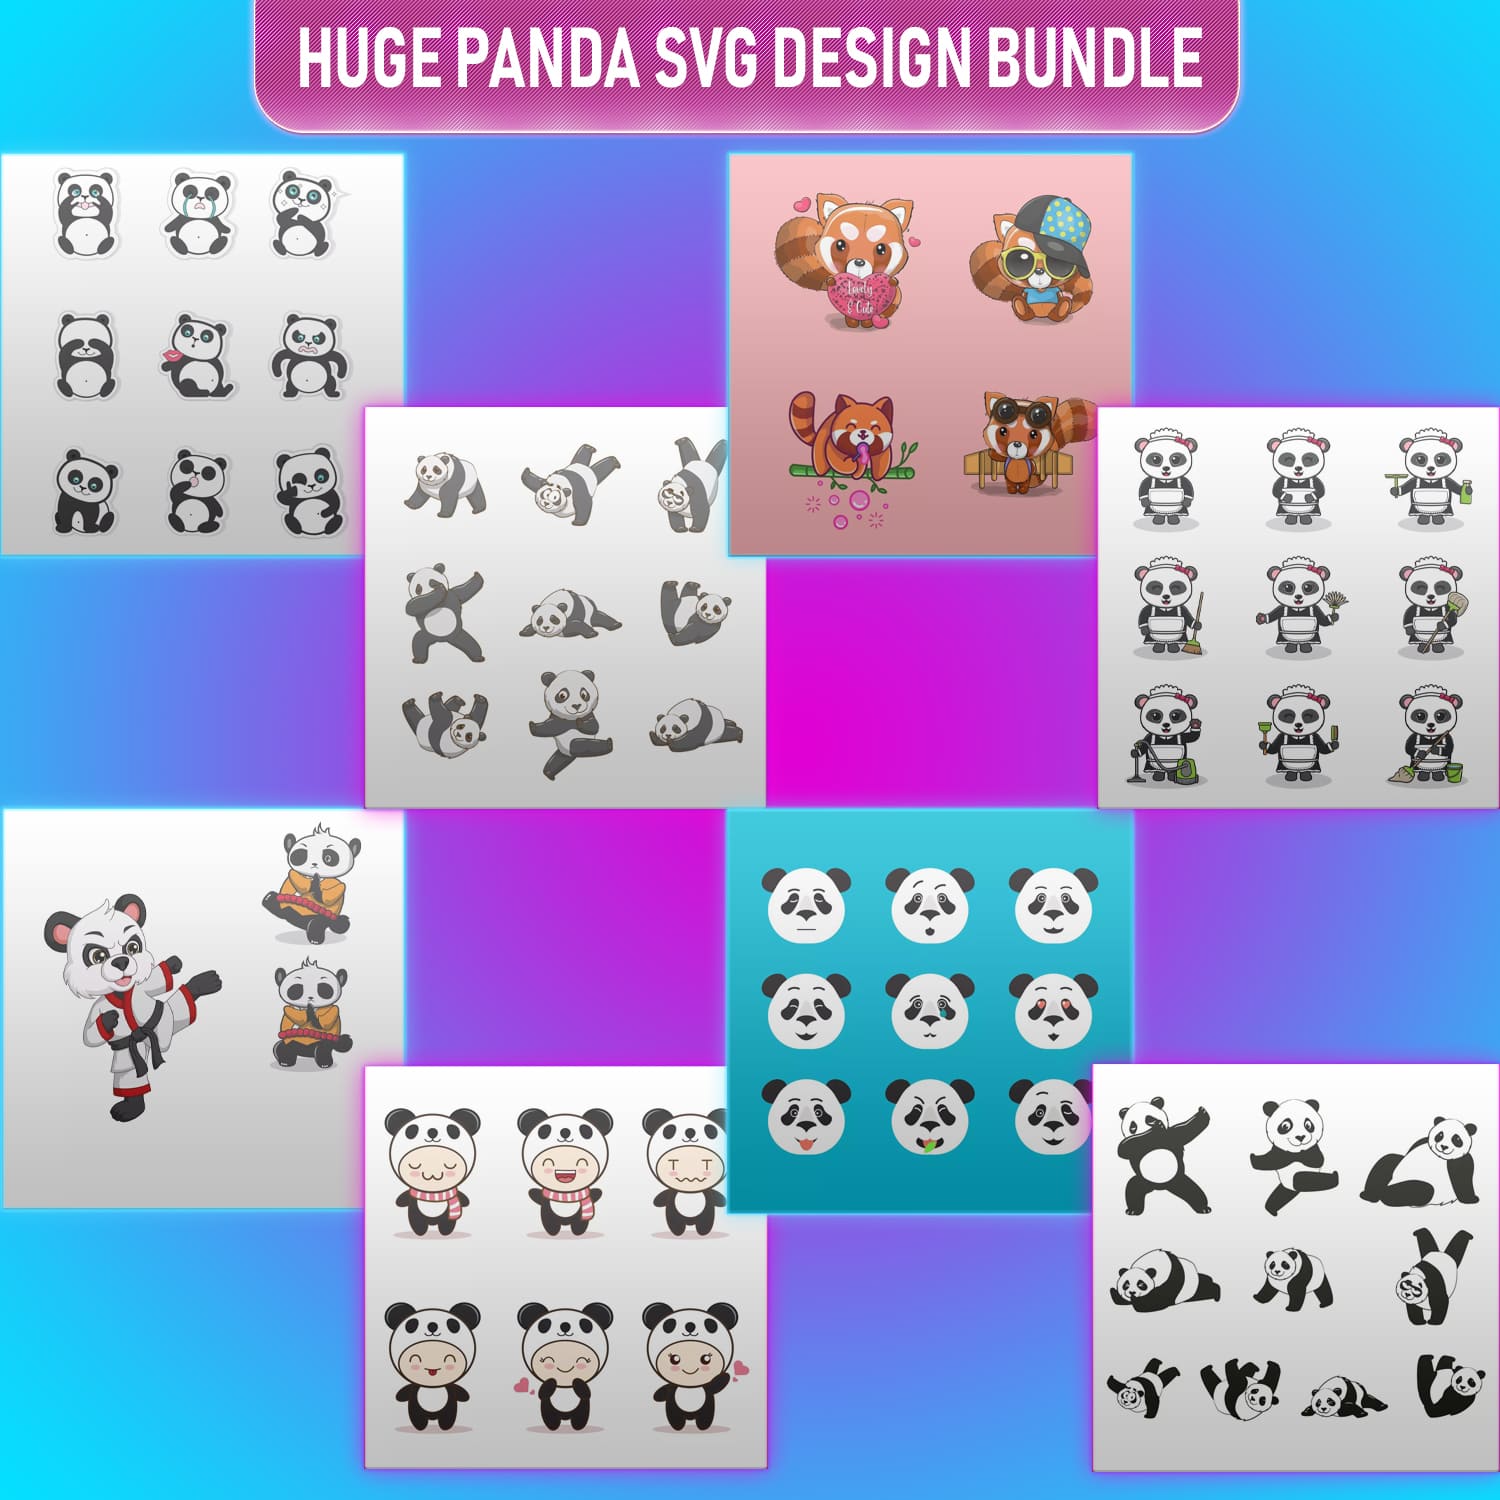 Bunch of panda stickers on a blue and pink background.